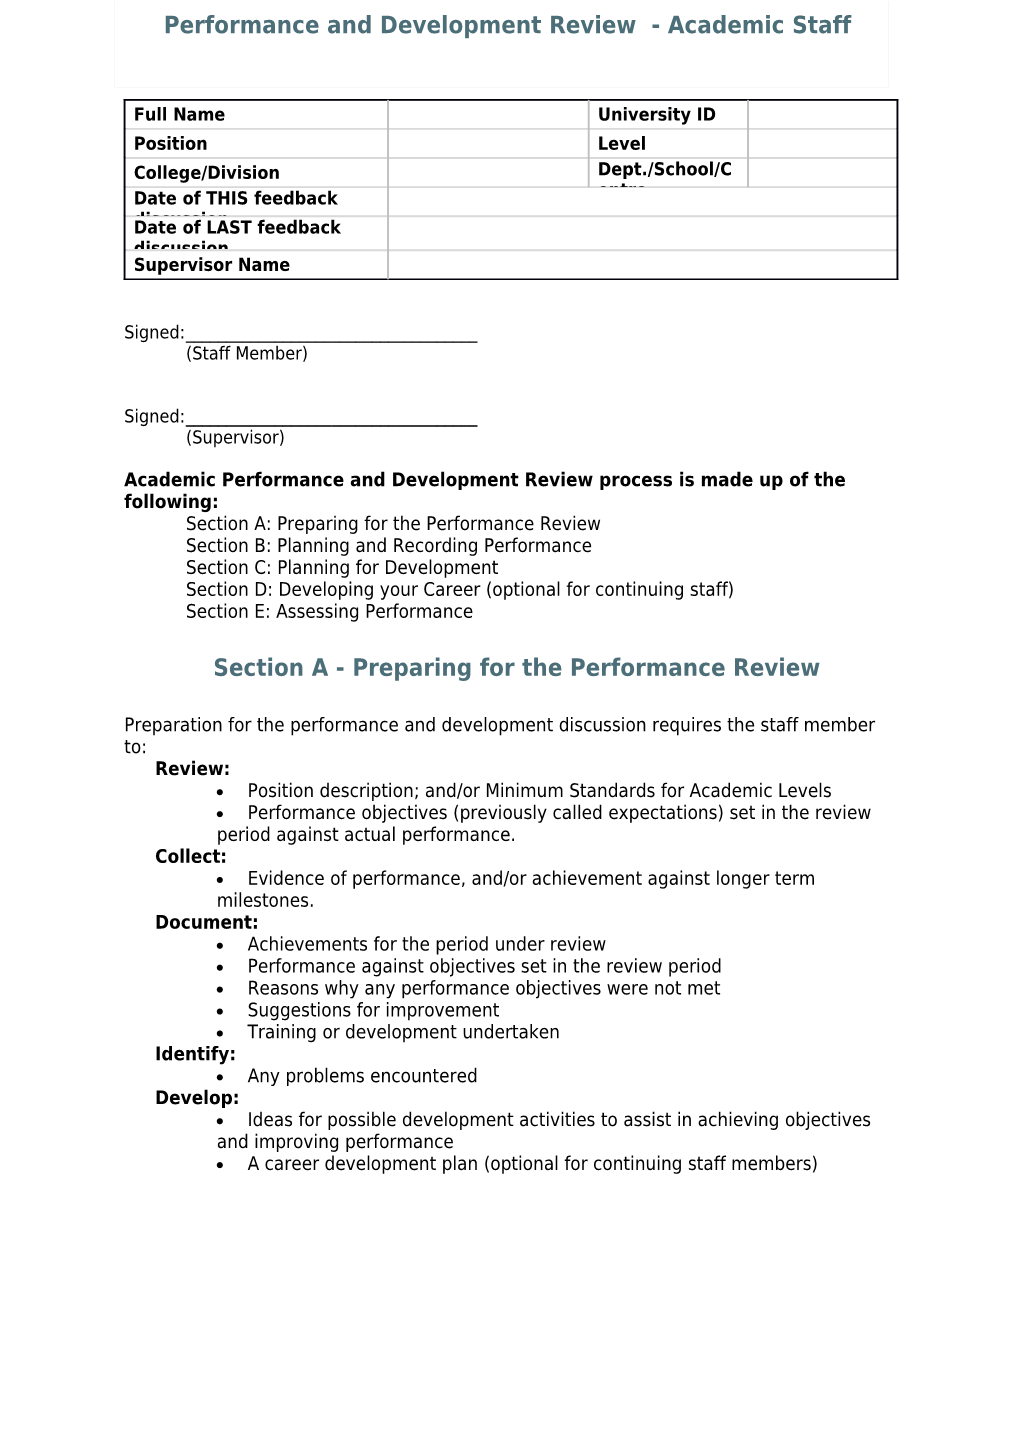 Academic Performance and Development Review Process Is Made up of the Following